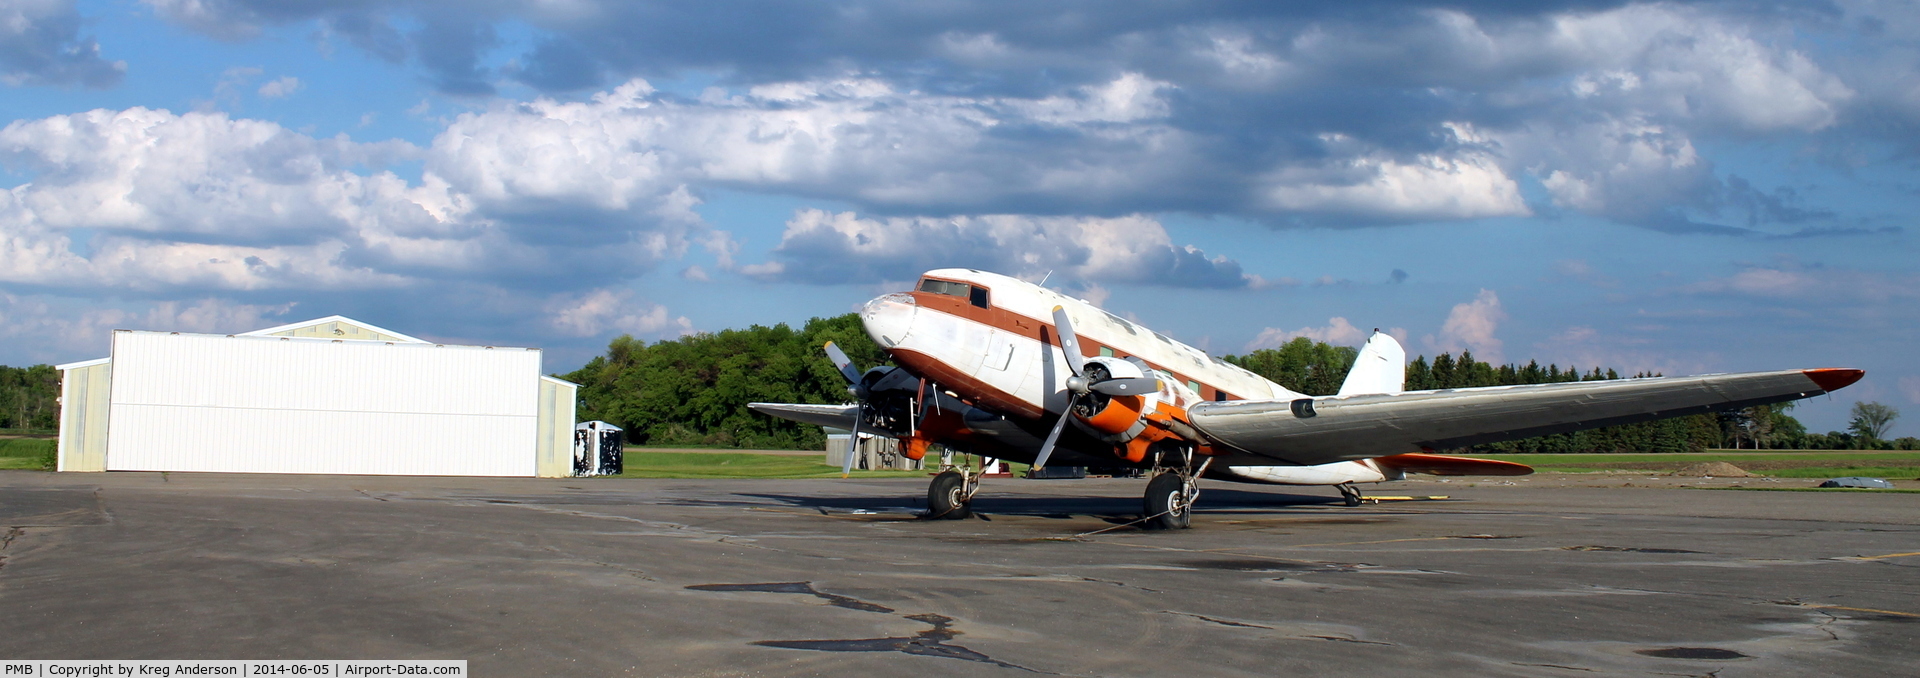 Pembina Municipal Airport (PMB) - Taking it back to 1943 with this Douglas DC-3 on the ramp. Definitely not what I was expecting to find at this rural airport on the Canadian border!